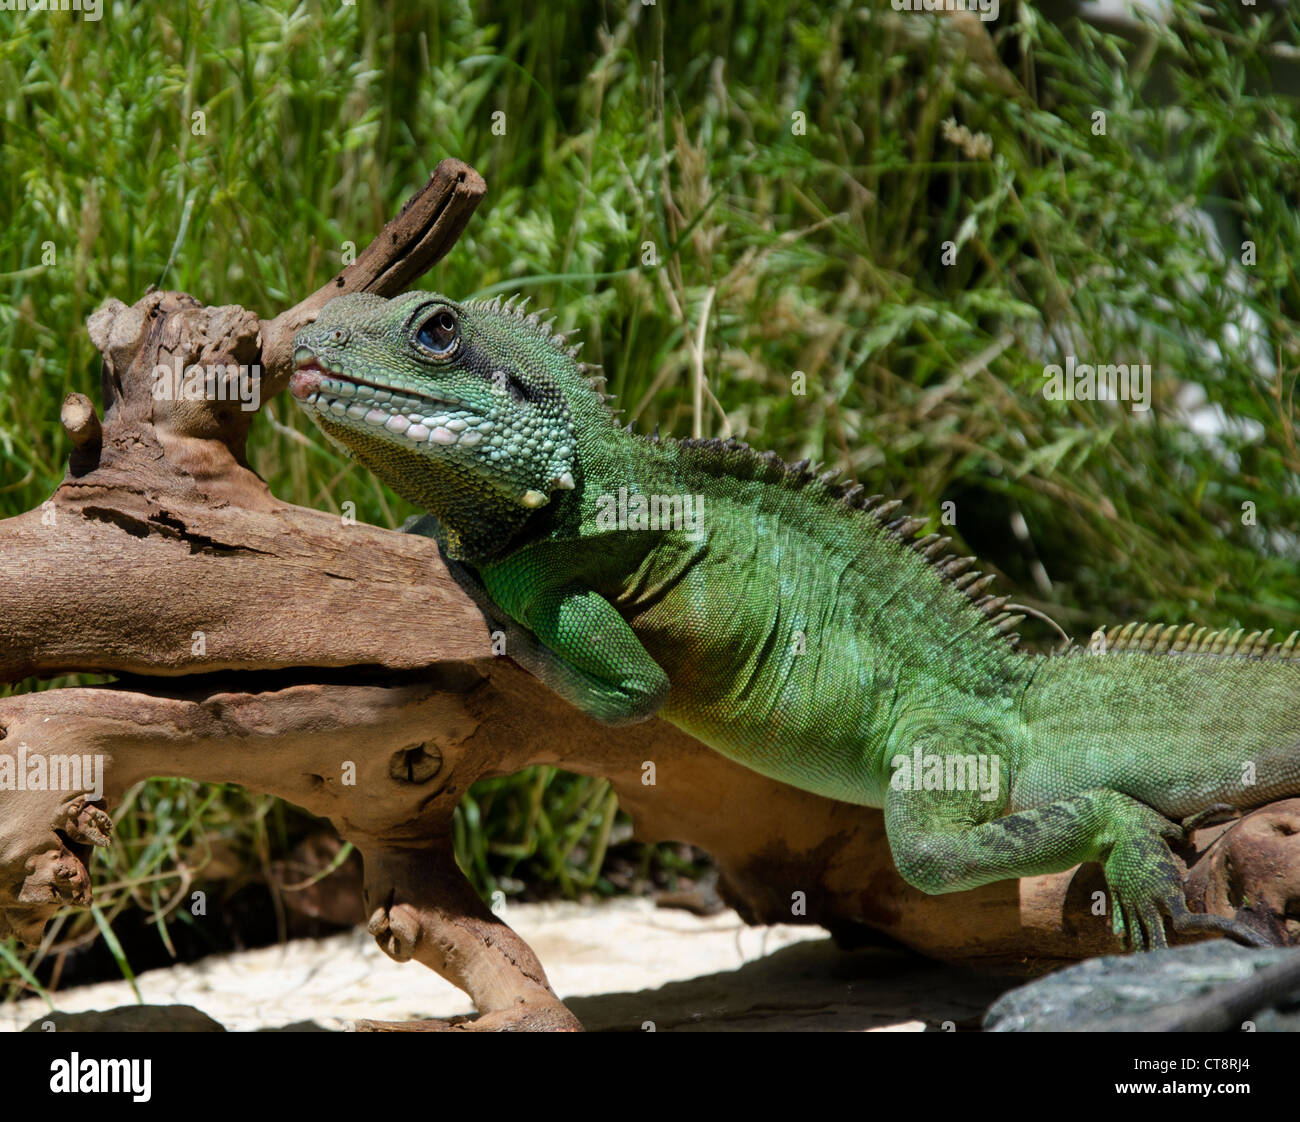 Photo of a live bright green Chinese Water Dragon lizard in a natural setting Stock Photo